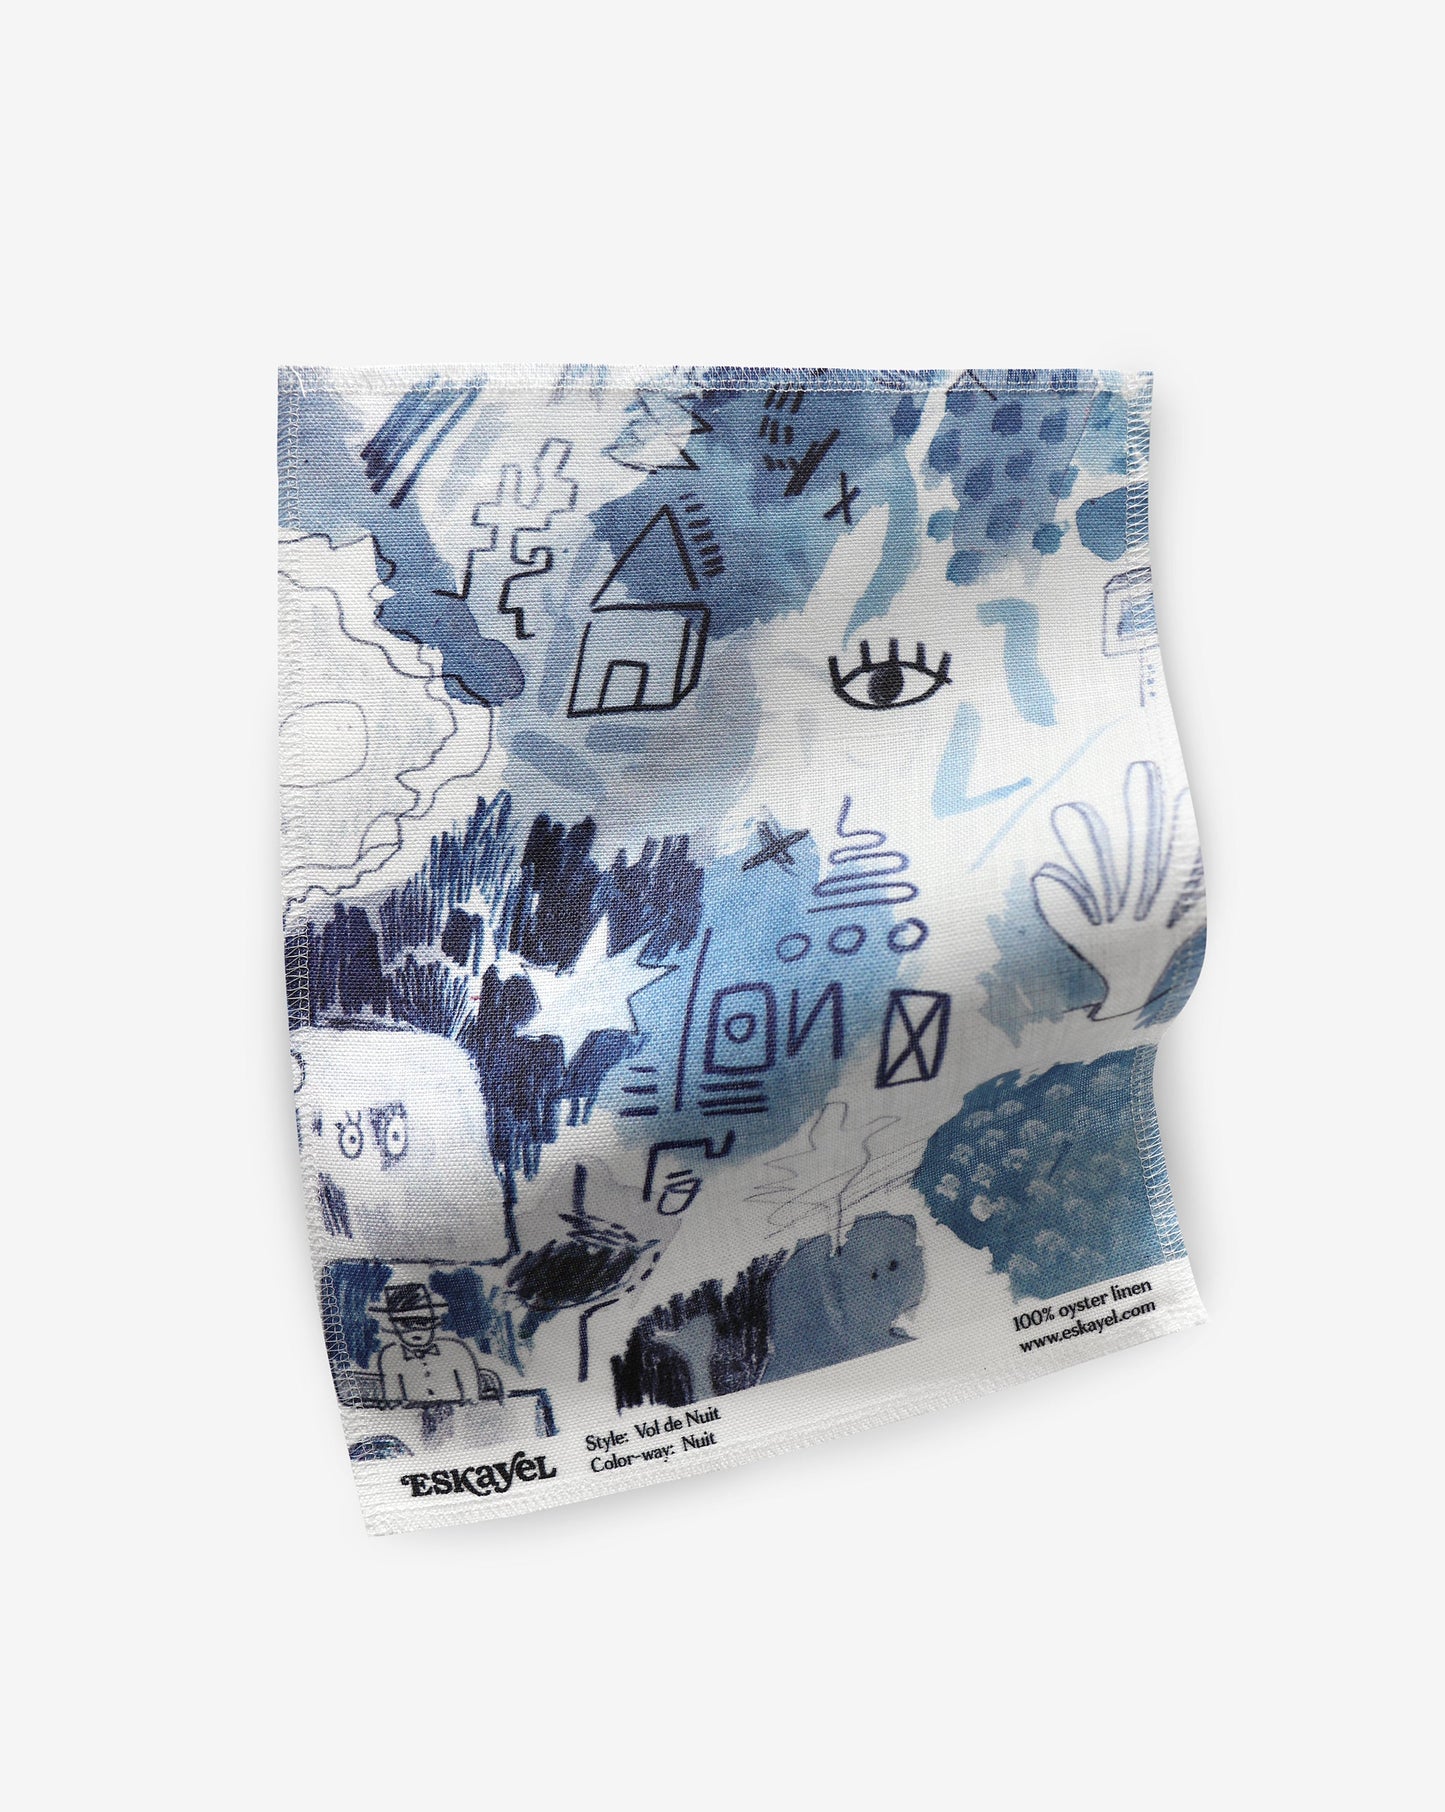 A Vol de Nuit Fabric with drawings on it